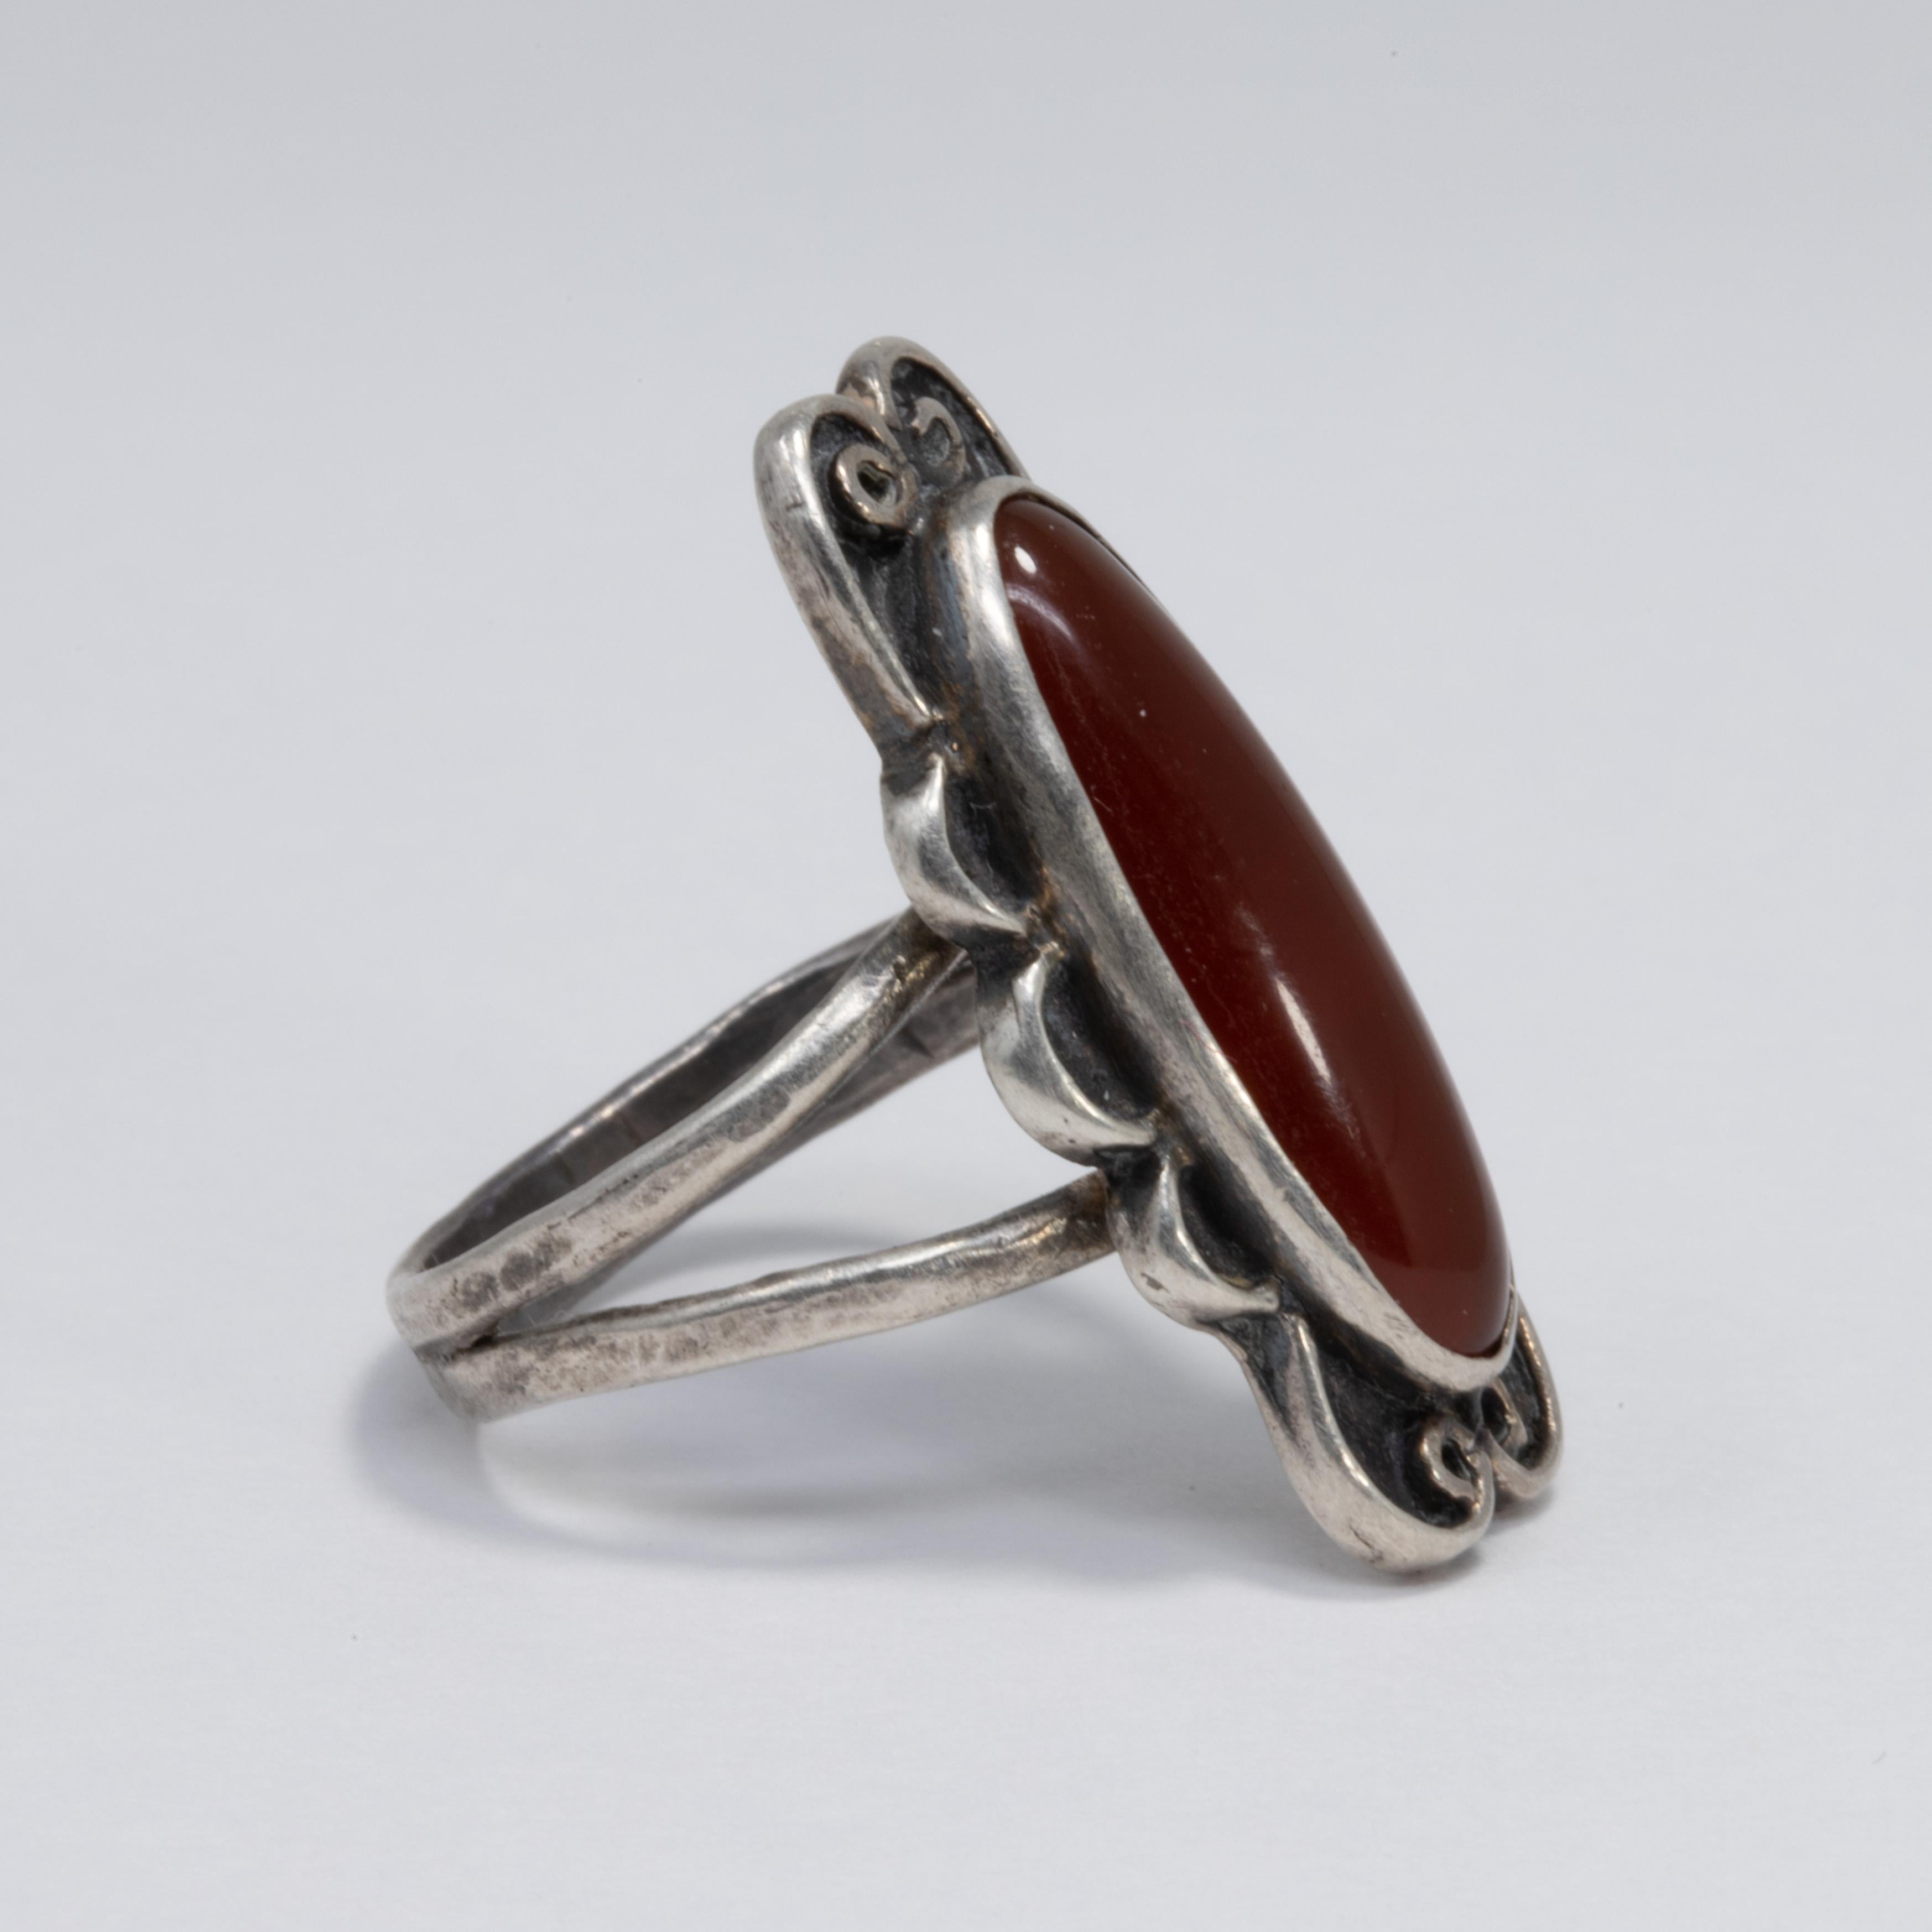 An exquisite art nouveau statement ring with a carnelian cabochon centerpiece. Decorative sterling silver bezel and band.

Ring size US 7.75

Marks / hallmarks / etc: Sterling